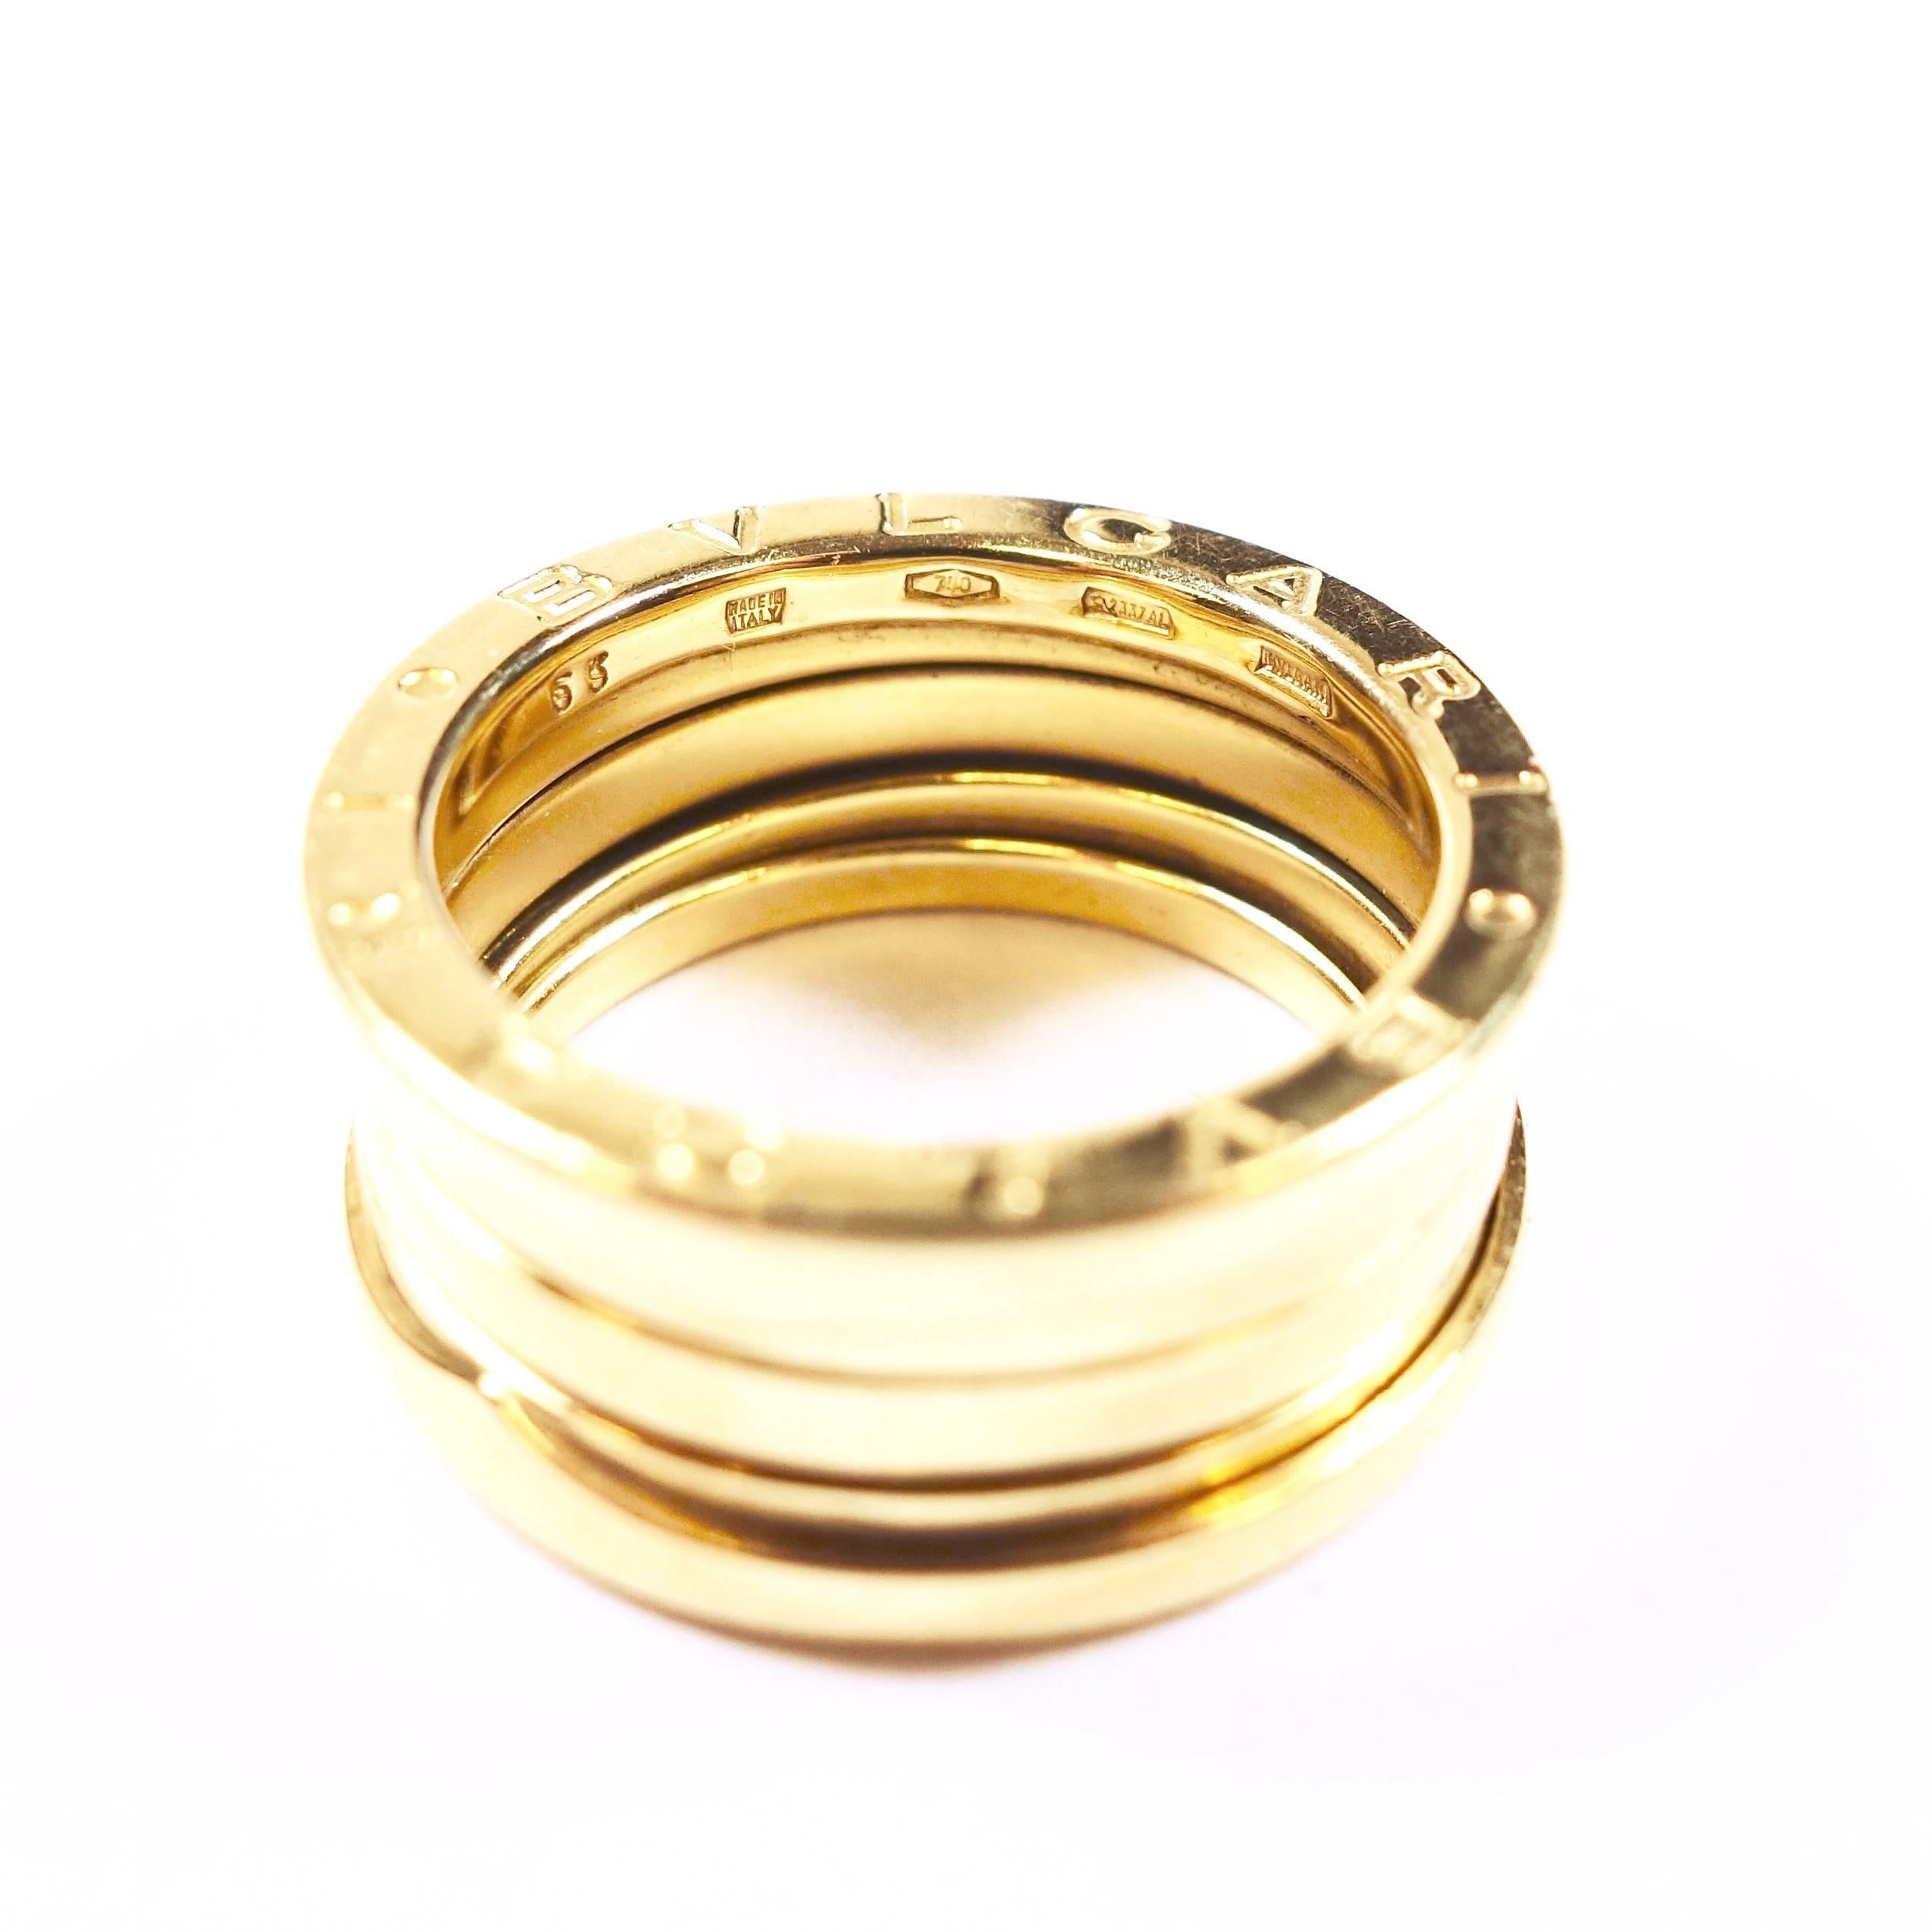 Bvlgari 18k Yellow Gold Ring from the B Zero collection.
Features 